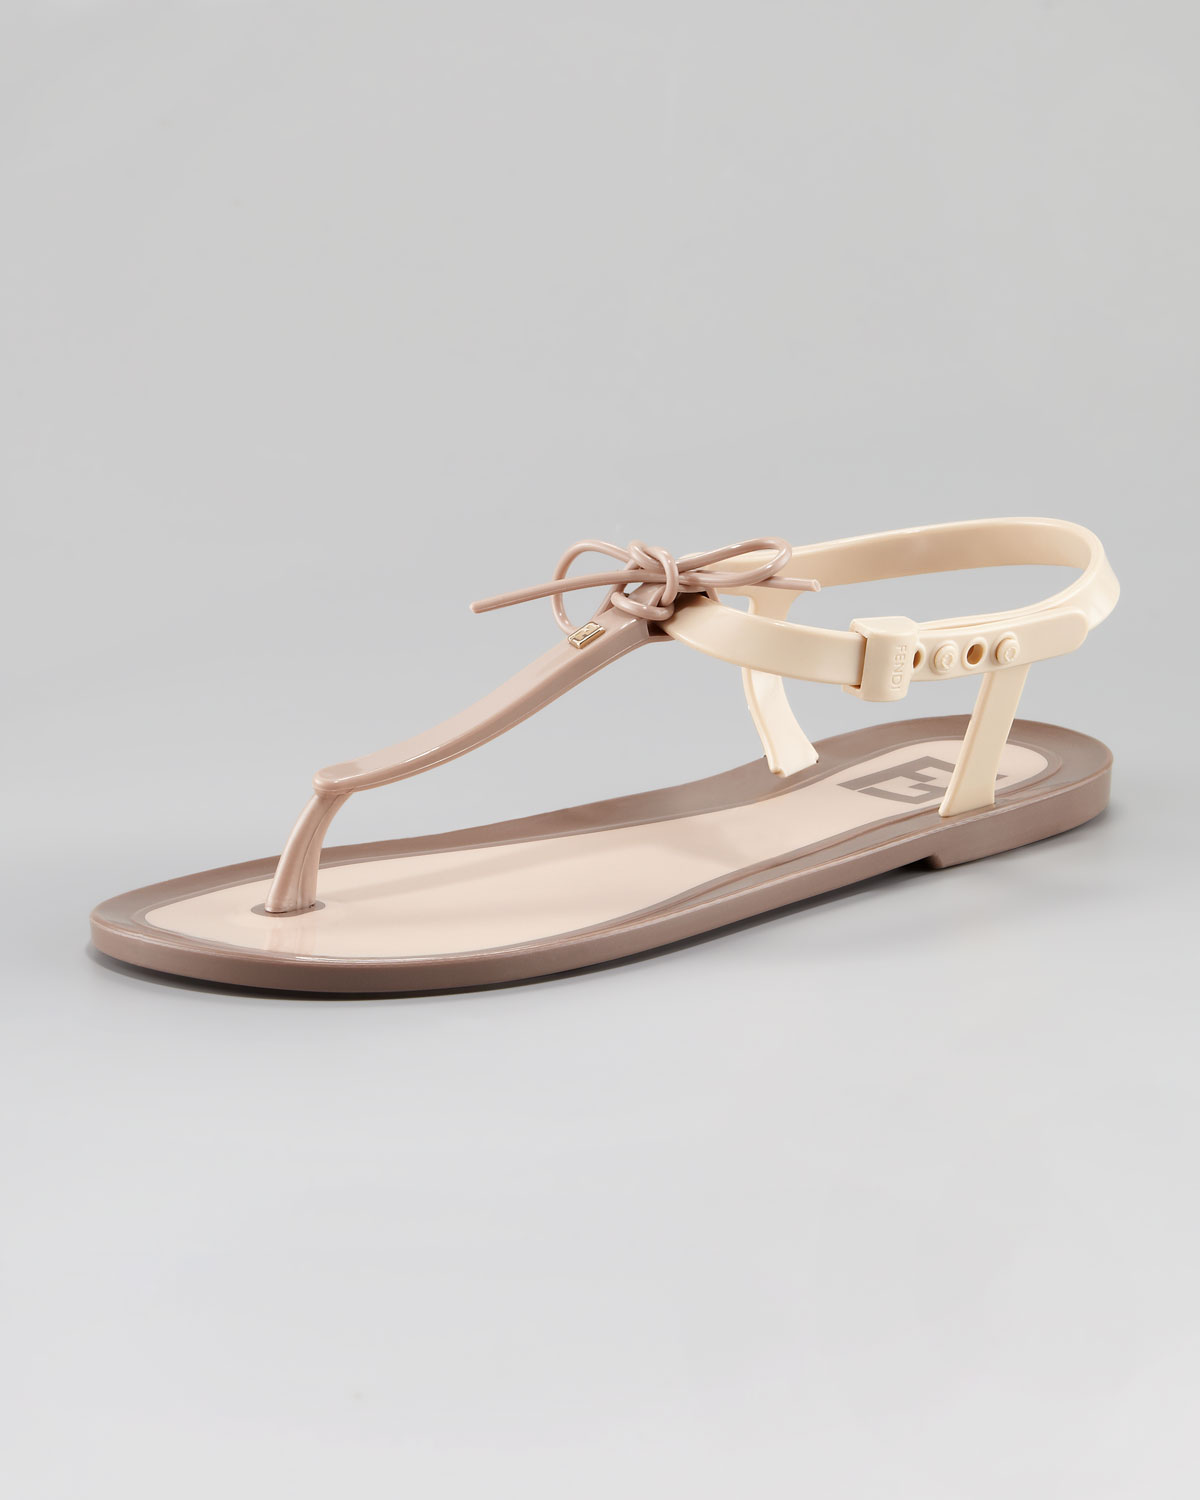 Lyst - Fendi Jelly Flat Thong Sandal in Natural